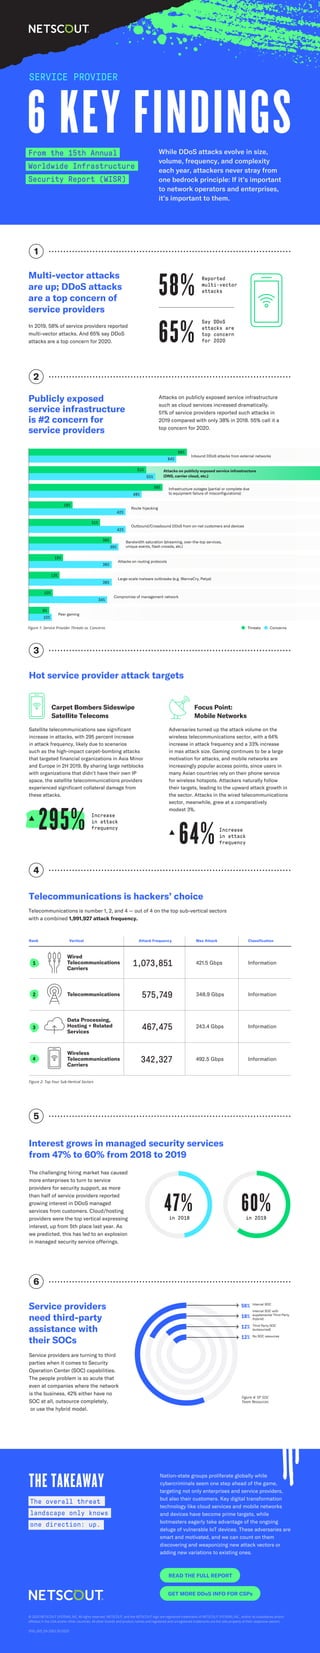 From the 15th Annual
Worldwide Infrastructure
Security Report (WISR)
SERVICE PROVIDER
6 KEY FINDINGS
Multi-vector attacks
are up; DDoS attacks
are a top concern of
service providers
While DDoS attacks evolve in size,
volume, frequency, and complexity
each year, attackers never stray from
one bedrock principle: If it’s important
to network operators and enterprises,
it’s important to them.
In 2019, 58% of service providers reported
multi-vector attacks. And 65% say DDoS
attacks are a top concern for 2020.
Service providers are turning to third
parties when it comes to Security
Operation Center (SOC) capabilities.
The people problem is so acute that
even at companies where the network
is the business, 42% either have no
SOC at all, outsource completely,
or use the hybrid model.
The challenging hiring market has caused
more enterprises to turn to service
providers for security support, as more
than half of service providers reported
growing interest in DDoS managed
services from customers. Cloud/hosting
providers were the top vertical expressing
interest, up from 5th place last year. As
we predicted, this has led to an explosion
in managed security service offerings.
Nation-state groups proliferate globally while
cybercriminals seem one step ahead of the game,
targeting not only enterprises and service providers,
but also their customers. Key digital transformation
technology like cloud services and mobile networks
and devices have become prime targets, while
botmasters eagerly take advantage of the ongoing
deluge of vulnerable IoT devices. These adversaries are
smart and motivated, and we can count on them
discovering and weaponizing new attack vectors or
adding new variations to existing ones.
Publicly exposed
service infrastructure
is #2 concern for
service providers
Attacks on publicly exposed service infrastructure
such as cloud services increased dramatically.
51% of service providers reported such attacks in
2019 compared with only 38% in 2018. 55% call it a
top concern for 2020.
Telecommunications is number 1, 2, and 4 — out of 4 on the top sub-vertical sectors
with a combined 1,991,927 attack frequency.
Carpet Bombers Sideswipe
Satellite Telecoms
Satellite telecommunications saw signiﬁcant
increase in attacks, with 295 percent increase
in attack frequency, likely due to scenarios
such as the high-impact carpet-bombing attacks
that targeted ﬁnancial organizations in Asia Minor
and Europe in 2H 2019. By sharing large netblocks
with organizations that didn’t have their own IP
space, the satellite telecommunications providers
experienced signiﬁcant collateral damage from
these attacks.
Focus Point:
Mobile Networks
Adversaries turned up the attack volume on the
wireless telecommunications sector, with a 64%
increase in attack frequency and a 33% increase
in max attack size. Gaming continues to be a large
motivation for attacks, and mobile networks are
increasingly popular access points, since users in
many Asian countries rely on their phone service
for wireless hotspots. Attackers naturally follow
their targets, leading to the upward attack growth in
the sector. Attacks in the wired telecommunications
sector, meanwhile, grew at a comparatively
modest 3%.
1
2
3
4
5
6
Hot service provider attack targets
Telecommunications is hackers’ choice
Interest grows in managed security services
from 47% to 60% from 2018 to 2019
Service providers
need third-party
assistance with
their SOCs
THE TAKEAWAY
READ THE FULL REPORT
GET MORE DDoS INFO FOR CSPs
© 2020 NETSCOUT SYSTEMS, INC. All rights reserved. NETSCOUT, and the NETSCOUT logo are registered trademarks of NETSCOUT SYSTEMS, INC., and/or its subsidiaries and/or
aﬃliates in the USA and/or other countries. All other brands and product names and registered and unregistered trademarks are the sole property of their respective owners.
SPIG_005_EN-2002 05/2020
Say DDoS
attacks are
top concern
for 202065%
Reported
multi-vector
attacks58%
Inbound DDoS attacks from external networks
Attacks on publicly exposed service infrastructure
(DNS, carrier cloud, etc.)
Route hijacking
Outbound/Crossbound DDoS from on-net customers and devices
Bandwidth saturation (streaming, over-the-top services,
unique events, ﬂash crowds, etc.)
Attacks on routing protocols
Large-scale malware outbreaks (e.g. WannaCry, Petya)
Compromise of management network
Peer gaming
Threats Concerns
69%
64%
51%
55%
58%
49%
19%
42%
31%
36%
15%
13%
10%
9%
10%
39%
36%
36%
34%
42%
Infrastructure outages (partial or complete due
to equipment failure of misconﬁgurations)
Increase
in attack
frequency295% Increase
in attack
frequency64%
Wired
Telecommunications
Carriers
Wireless
Telecommunications
Carriers
Telecommunications
Data Processing,
Hosting + Related
Services
1
2
3
4
Rank Vertical Max AttackAttack Frequency Classiﬁcation
1,073,851
575,749
467,475
342,327
421.5 Gbps
348.9 Gbps
243.4 Gbps
492.5 Gbps
Information
Information
Information
Information
Figure 2: Top Four Sub-Vertical Sectors
Internal SOC
Internal SOC with
supplemental Third Party
(hybrid)
Third Party SOC
(outsourced)
No SOC resources
56%
18%
12%
12%
Figure 1: Service Provider Threats vs. Concerns
The overall threat
landscape only knows
one direction: up.
Figure 4: SP SOC
Team Resources
60%47%in 2018 in 2019
 